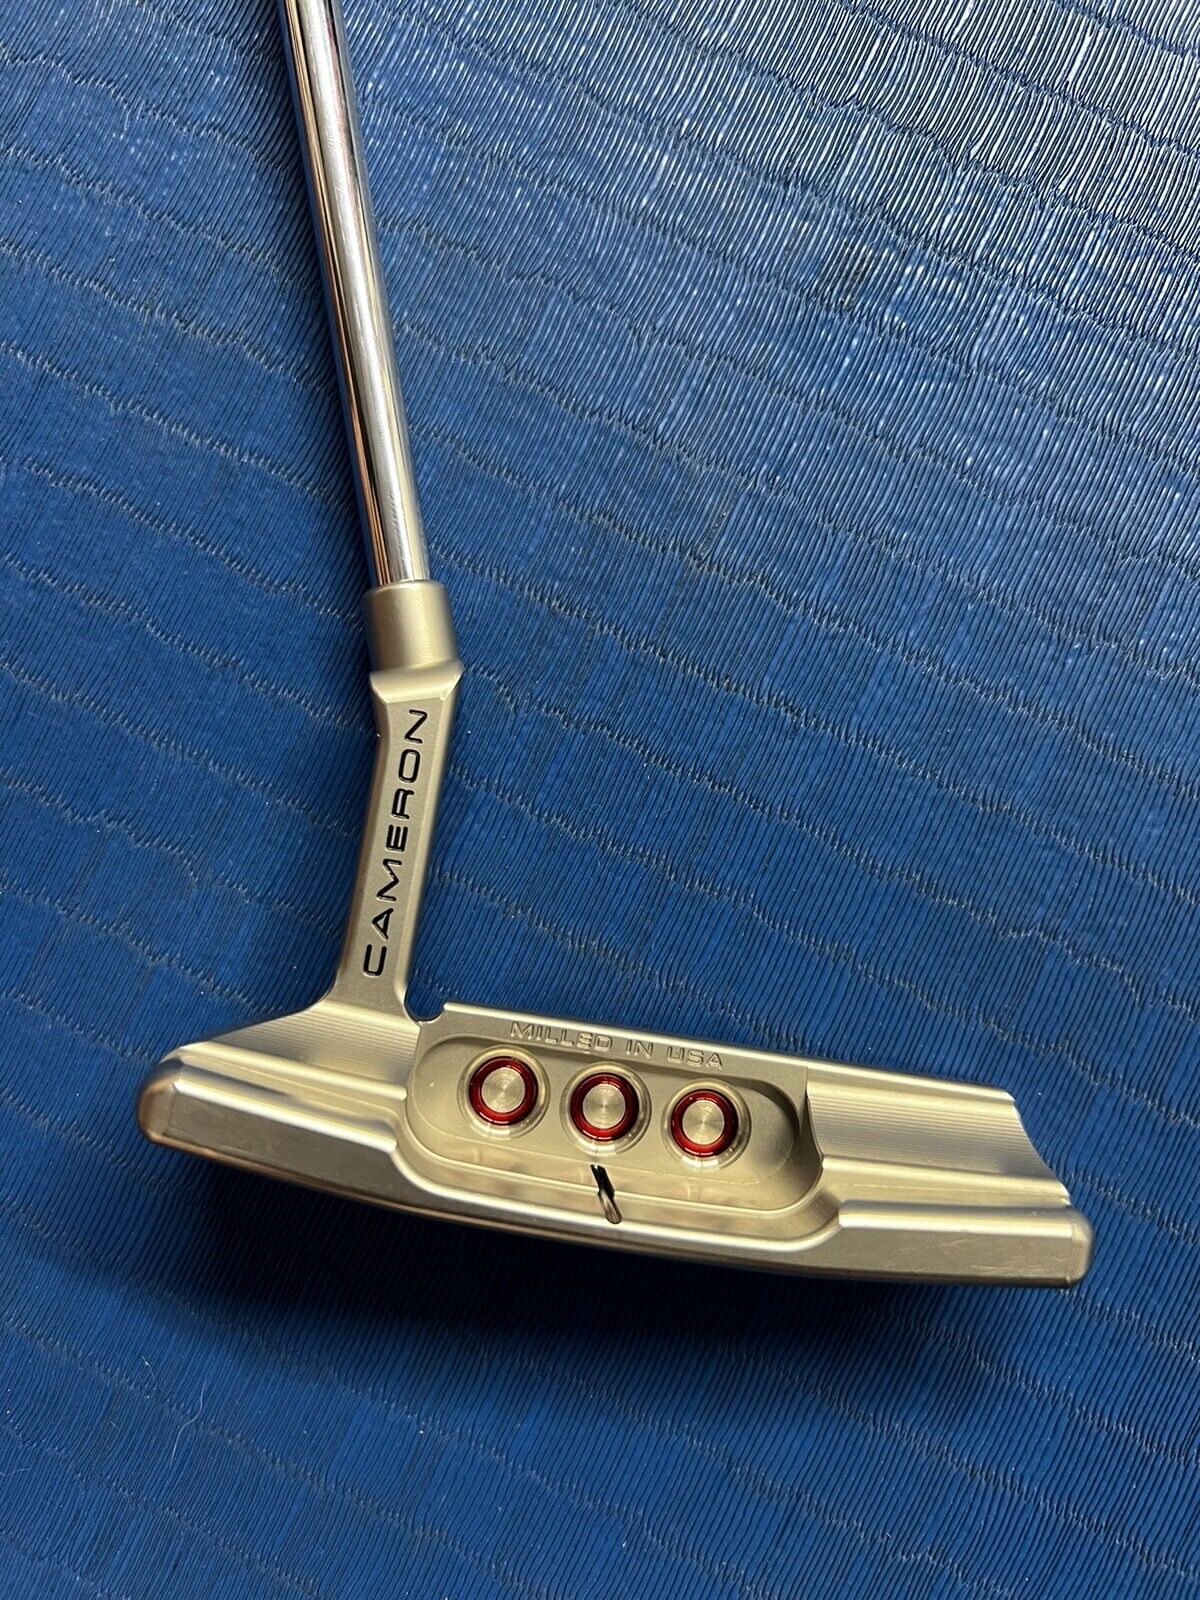 FLAWLESS Scotty Cameron Special Select Putter Newport 2 - 33”